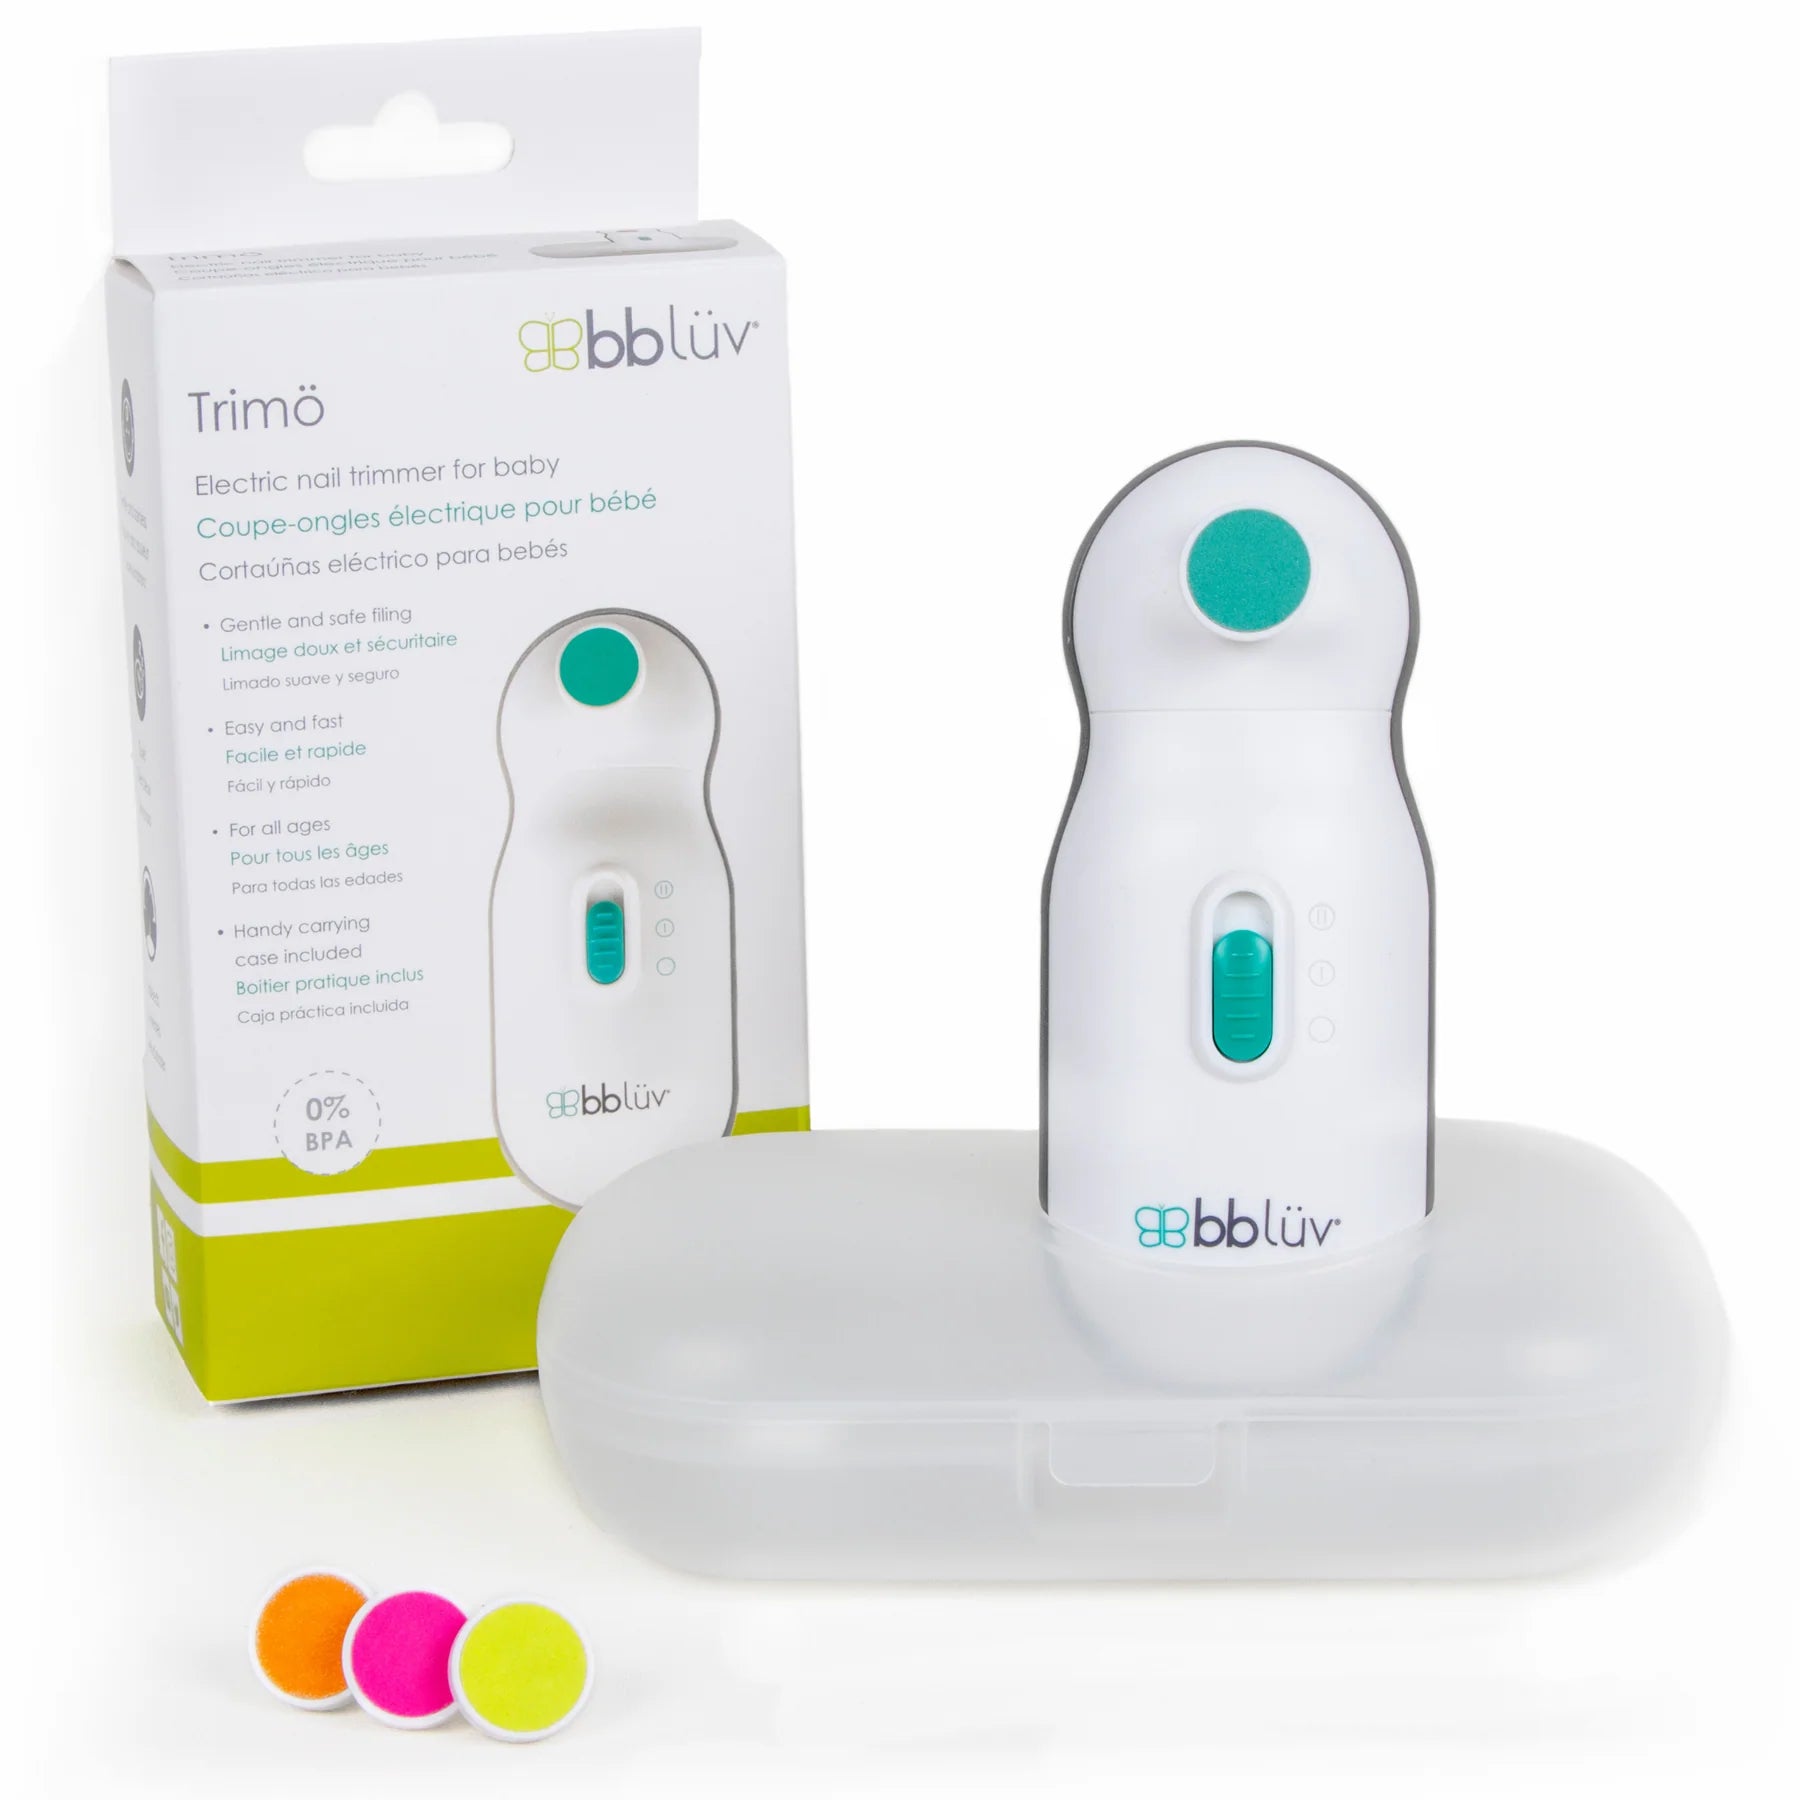 BBluv Trimo Electric Nail Trimmer